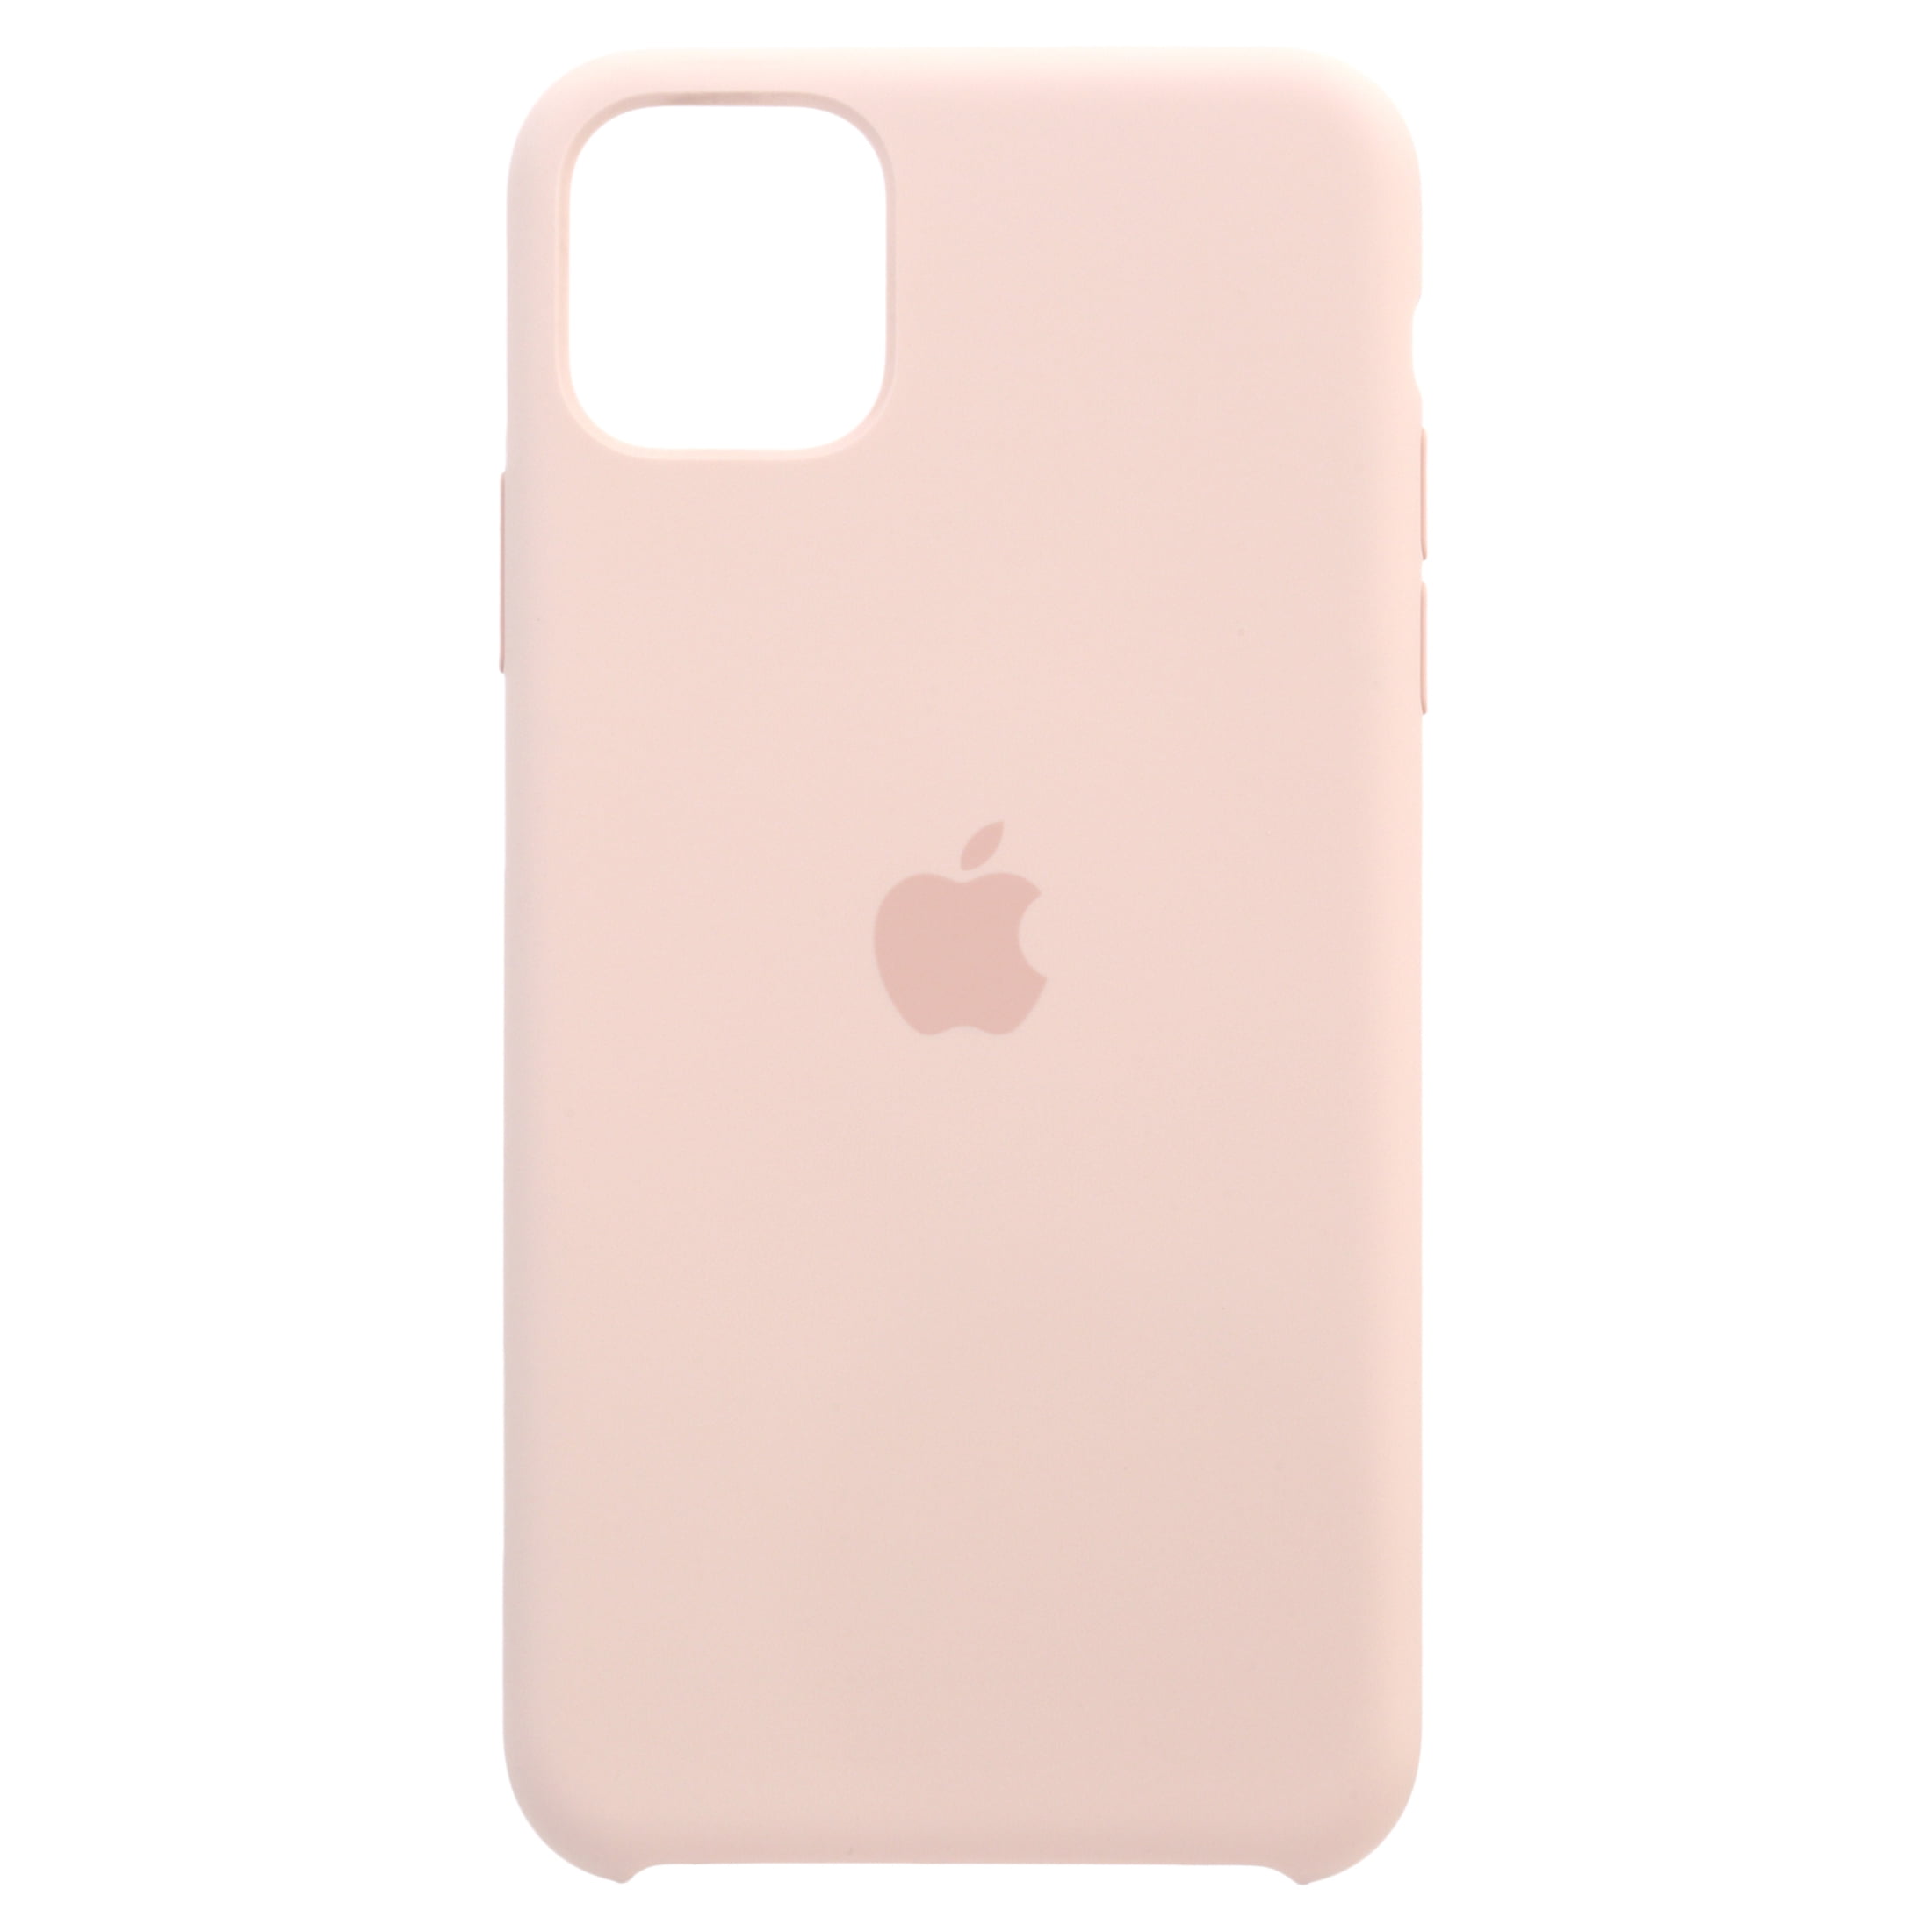 iPhone 11 Pro Max Case Strap Pink  SURITT High-End Leather Cases